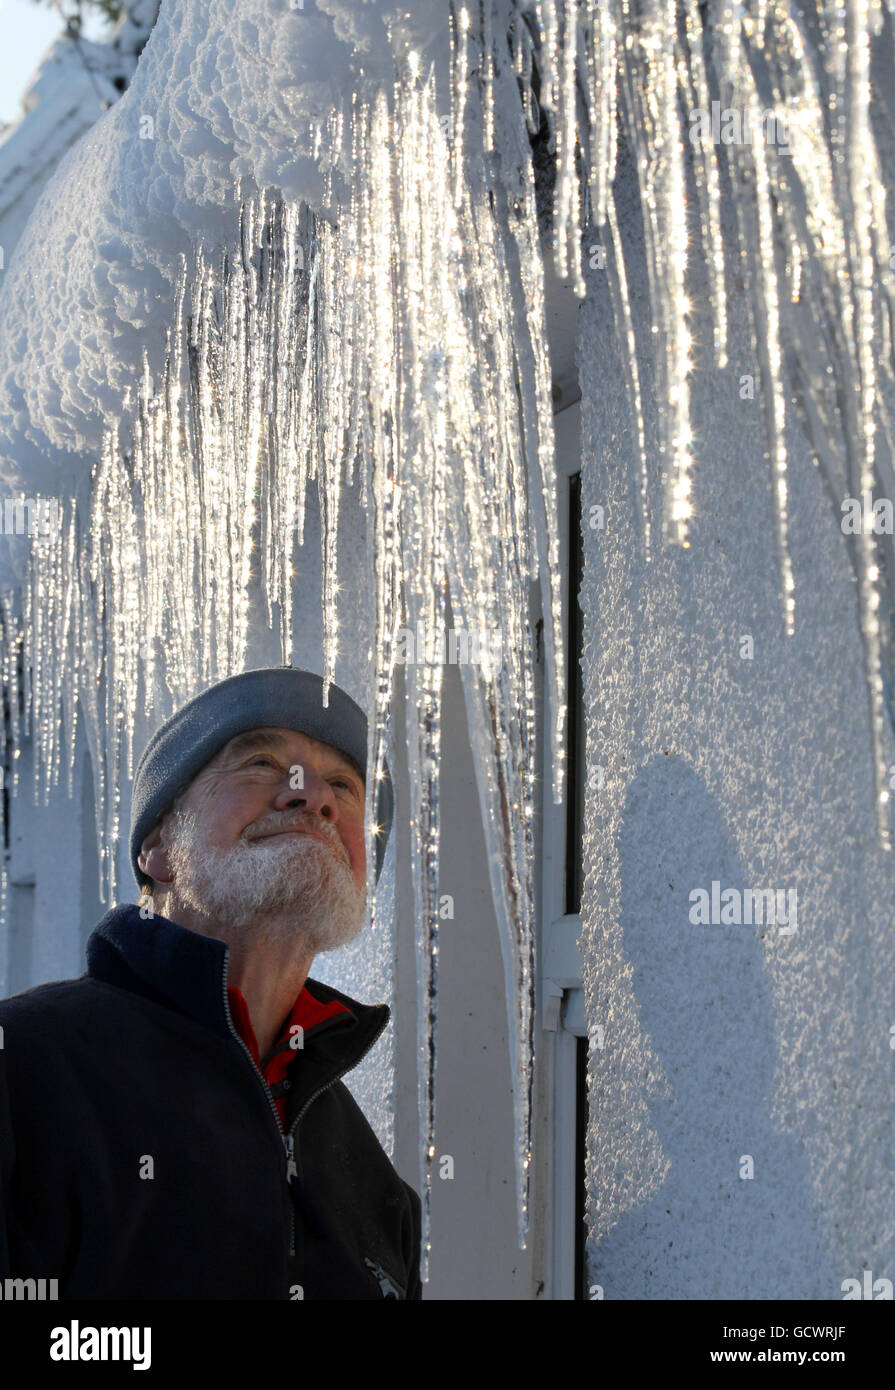 Peter Edmands looks at icicles attached to the gutter of his house in Kippen, central Scotland as the cold snap continues to hit the UK. Stock Photo